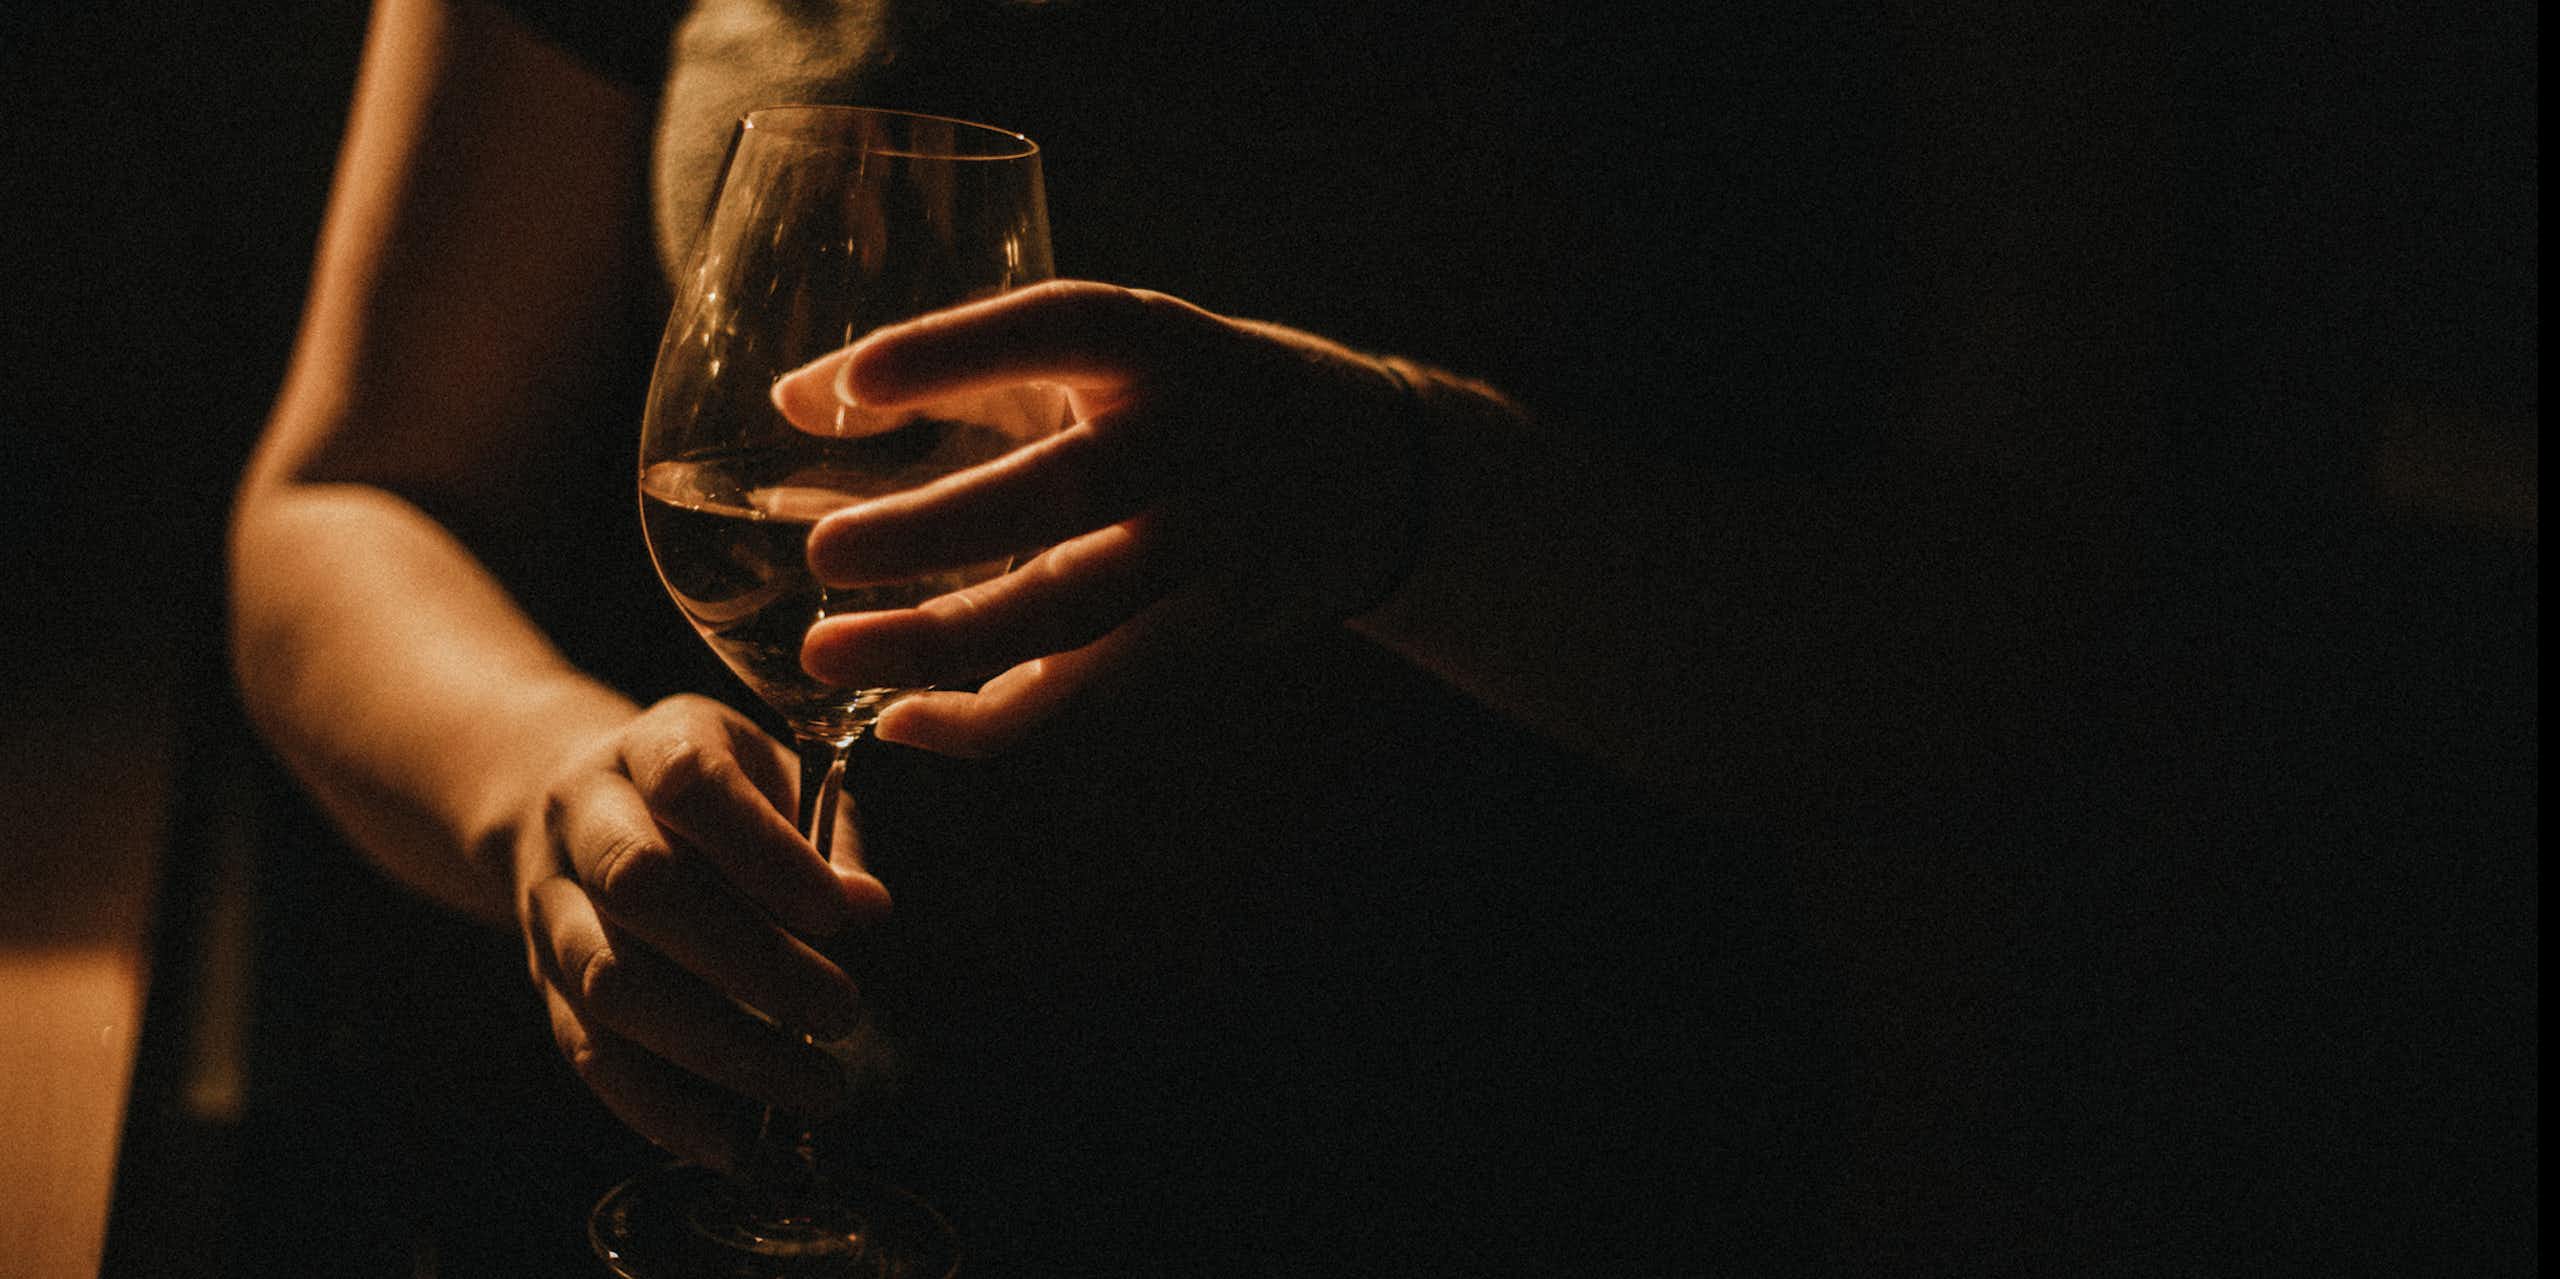 Close-up of person holding glass of wine between two hands